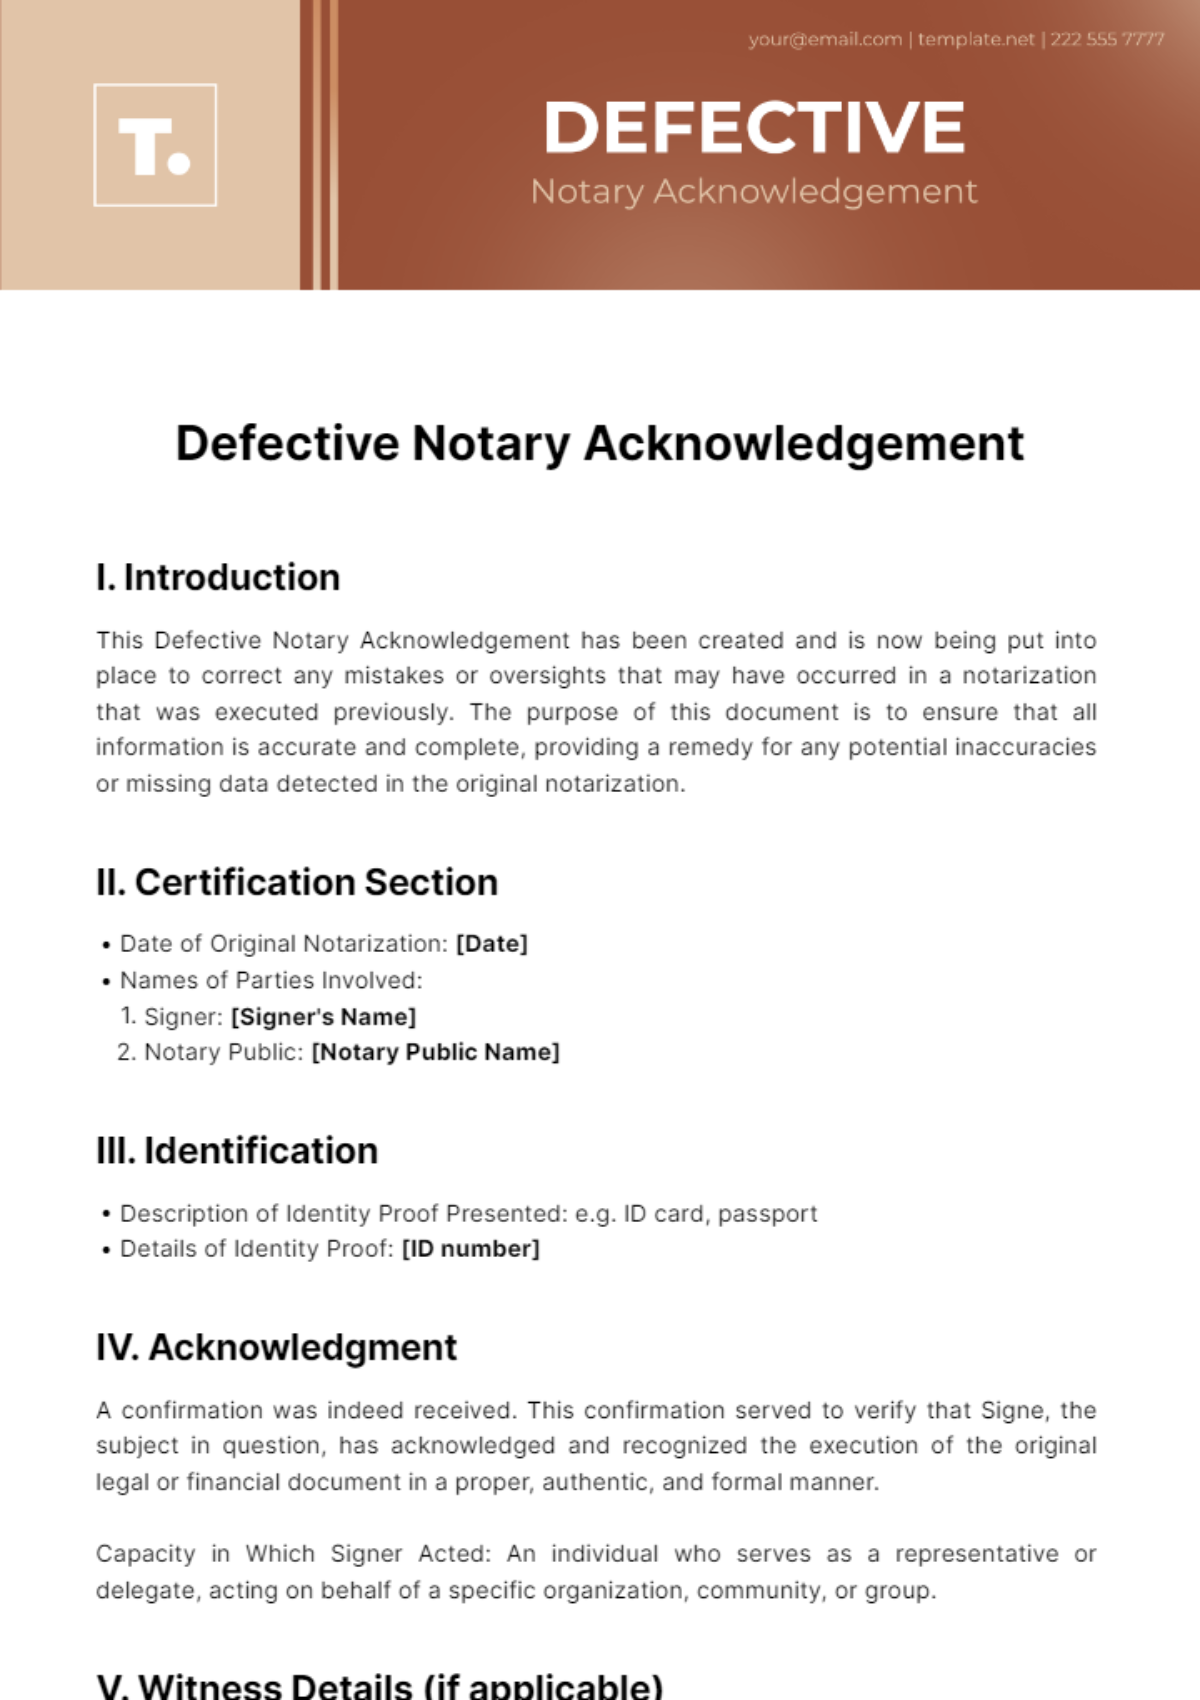 Free Defective Notary Acknowledgement Template